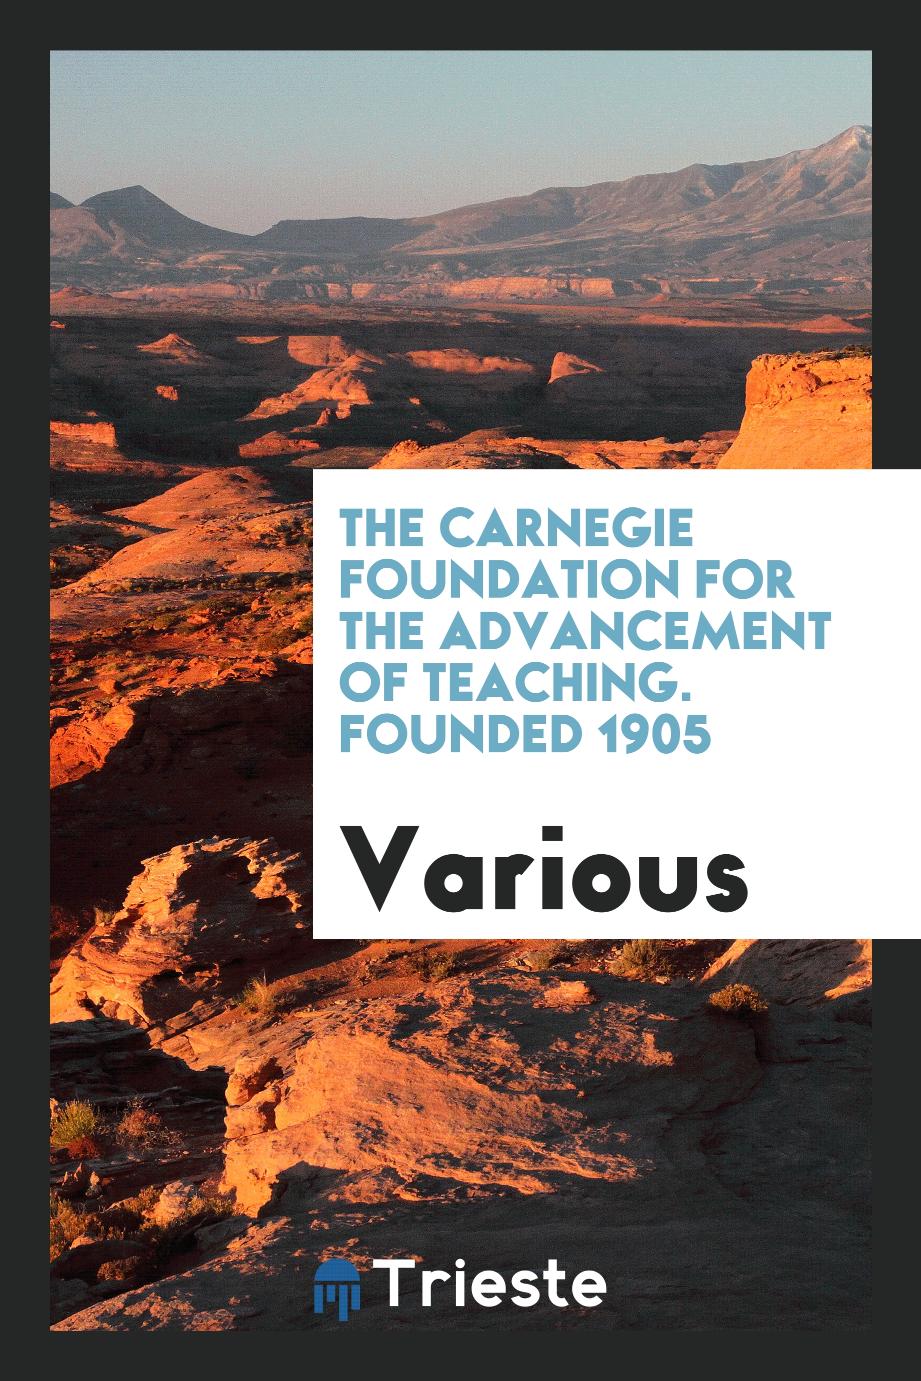 The Carnegie foundation for the advancement of teaching. Founded 1905